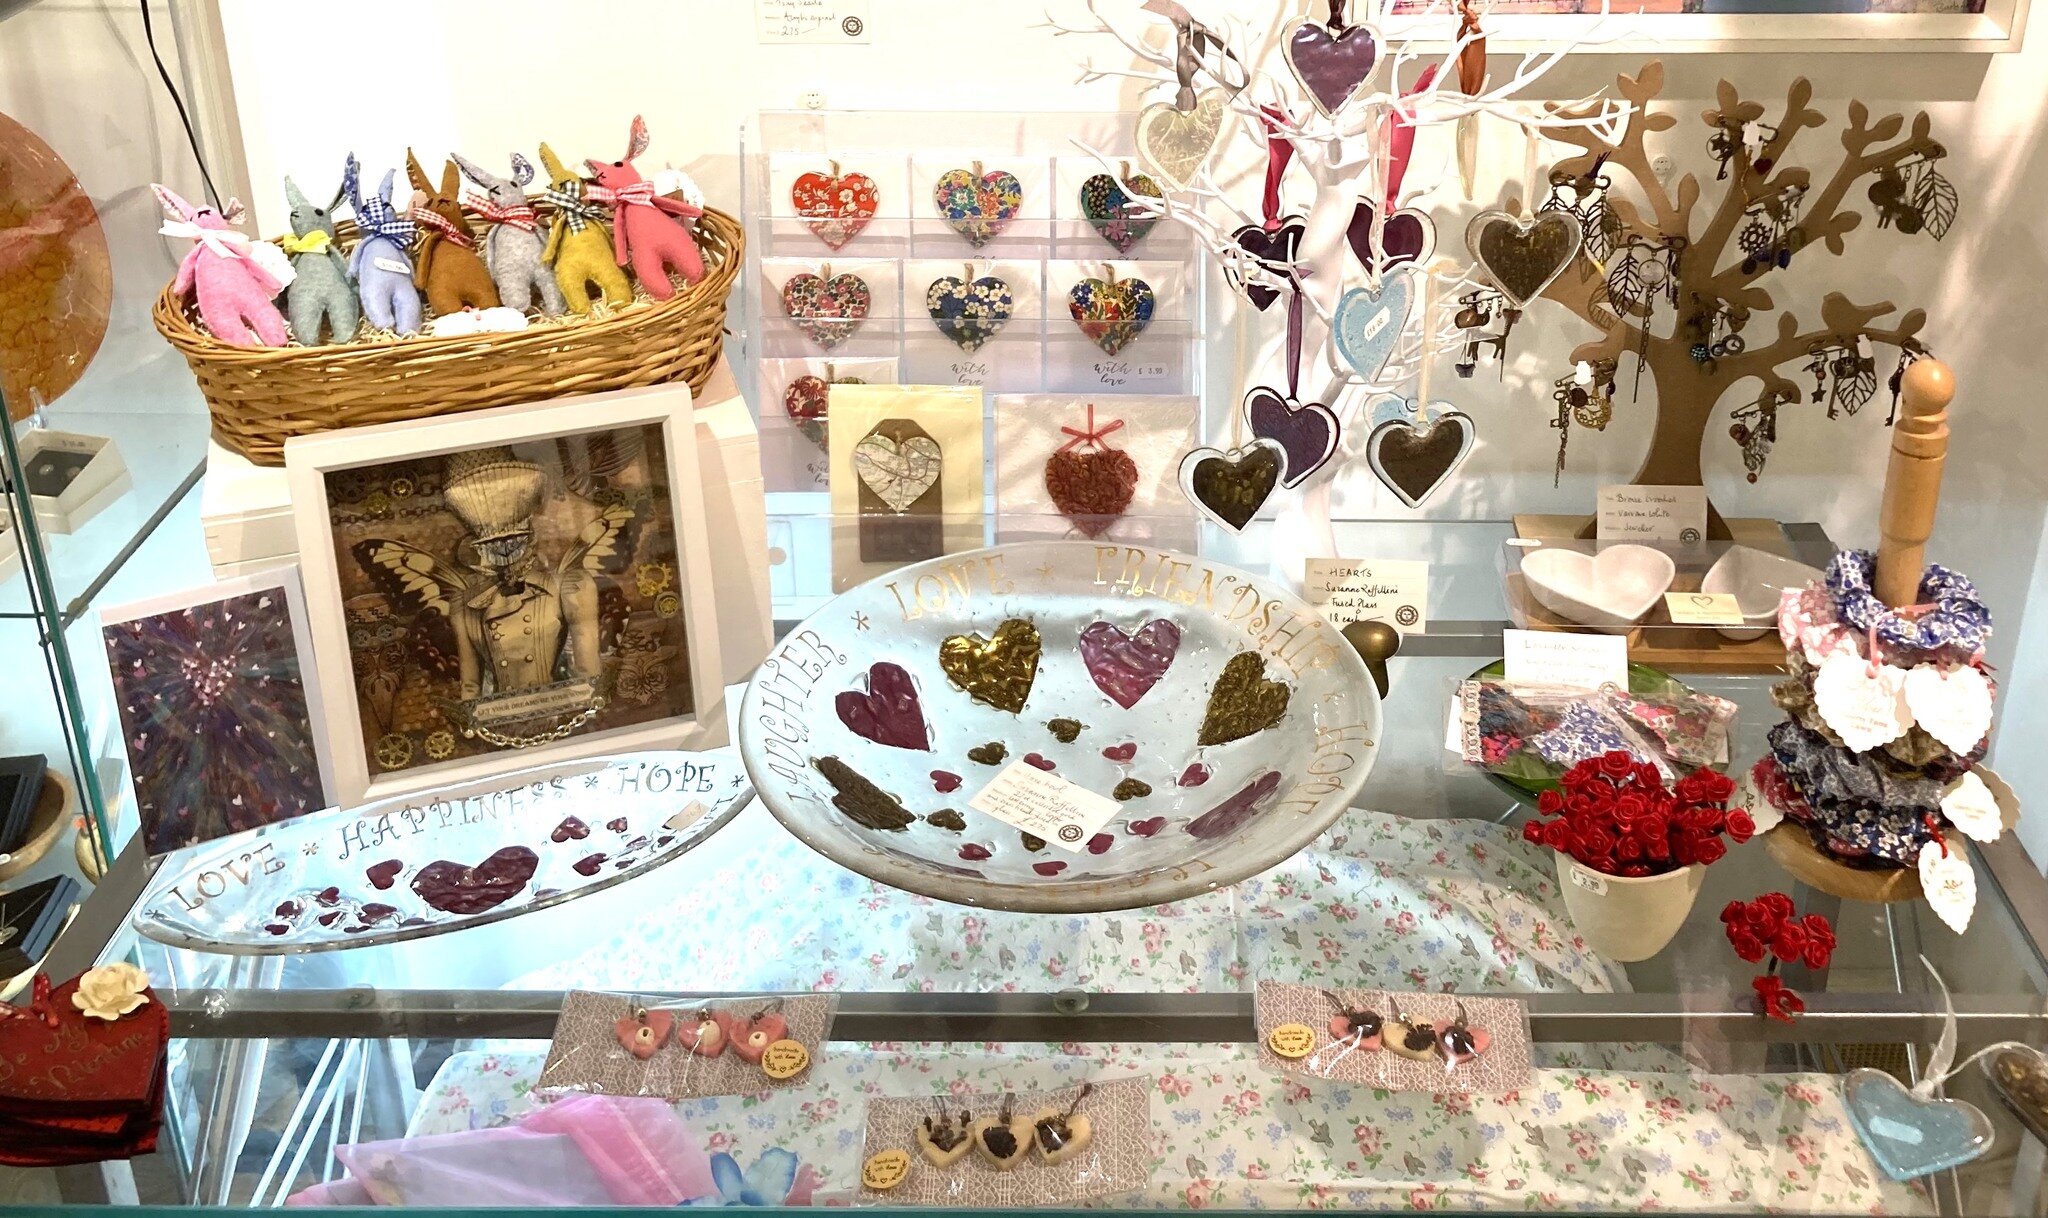 14 days til Valentine's so come and browse for gift ideas for your Valentine...

Opening hours: Wednesday to Saturday 10am-4pm